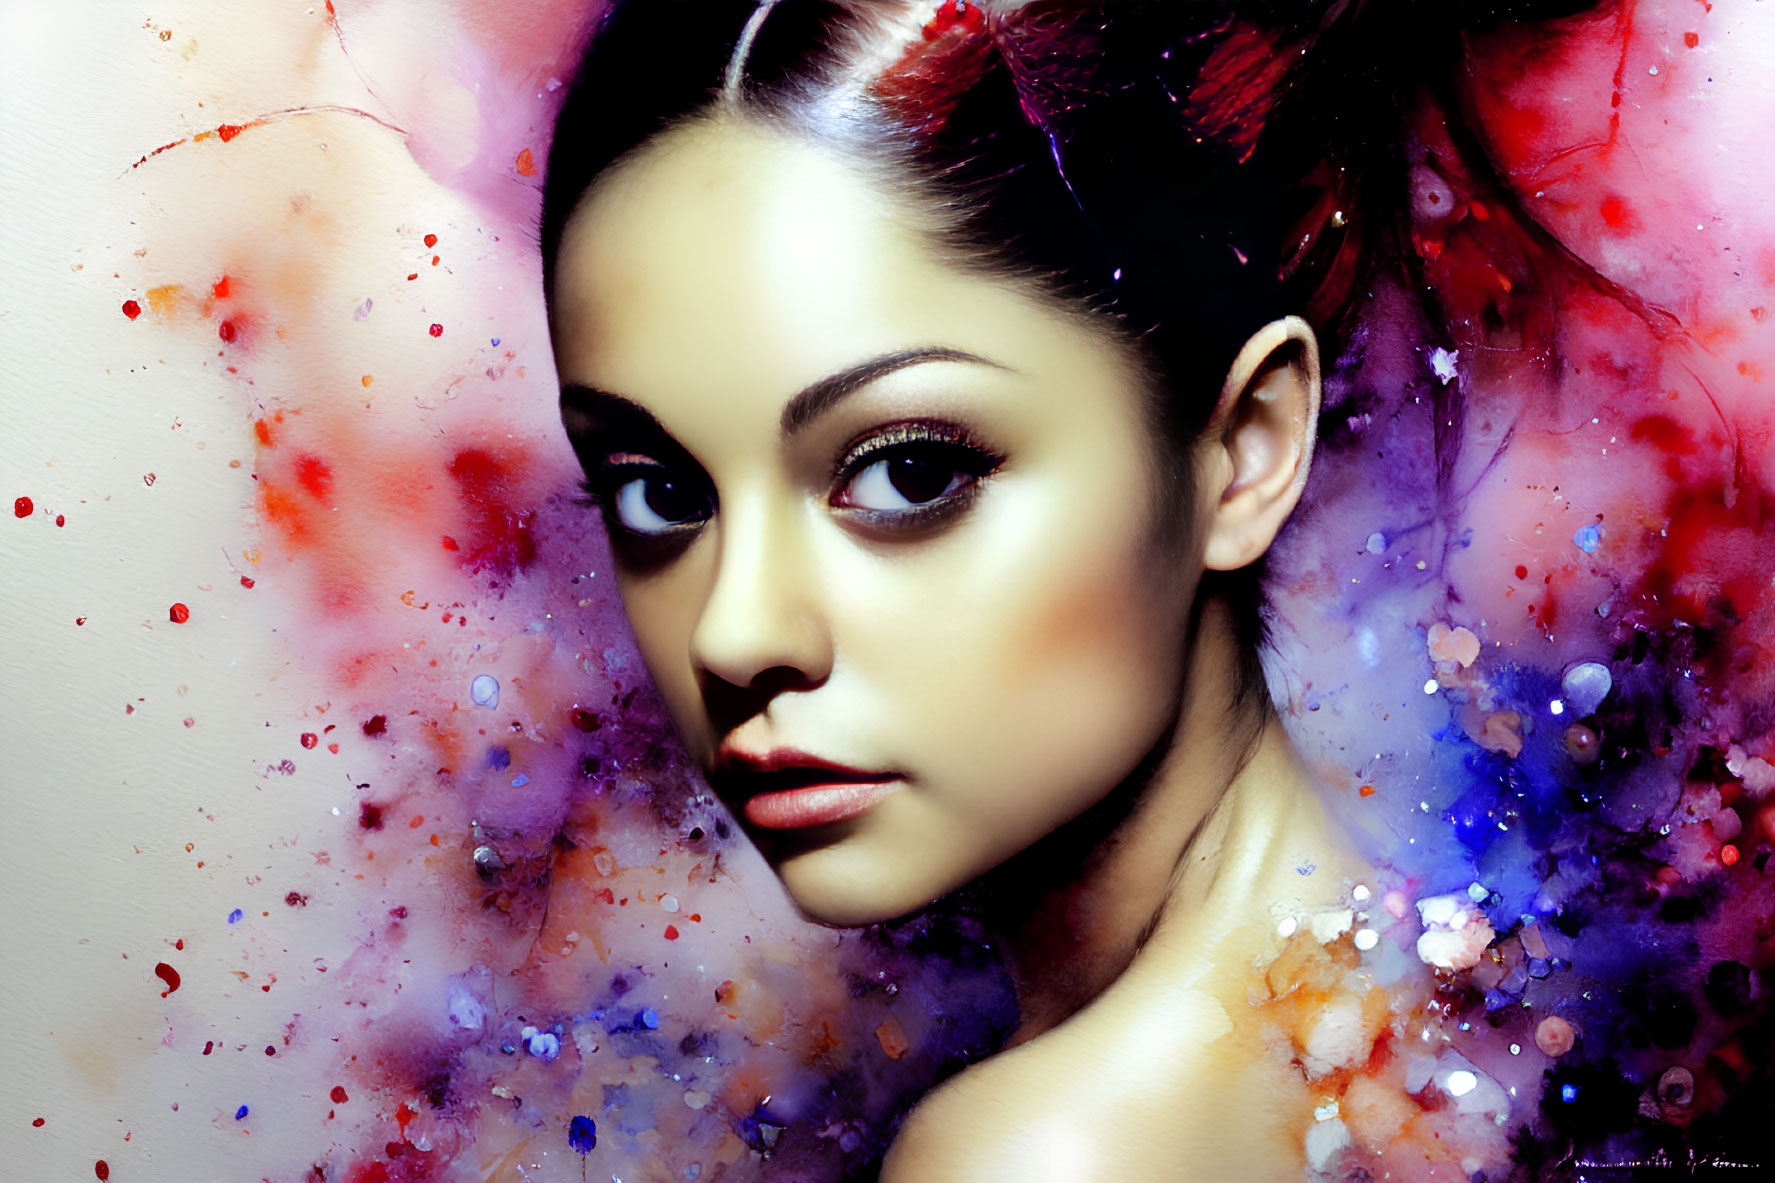 Vividly colored abstract portrait of a woman with striking makeup